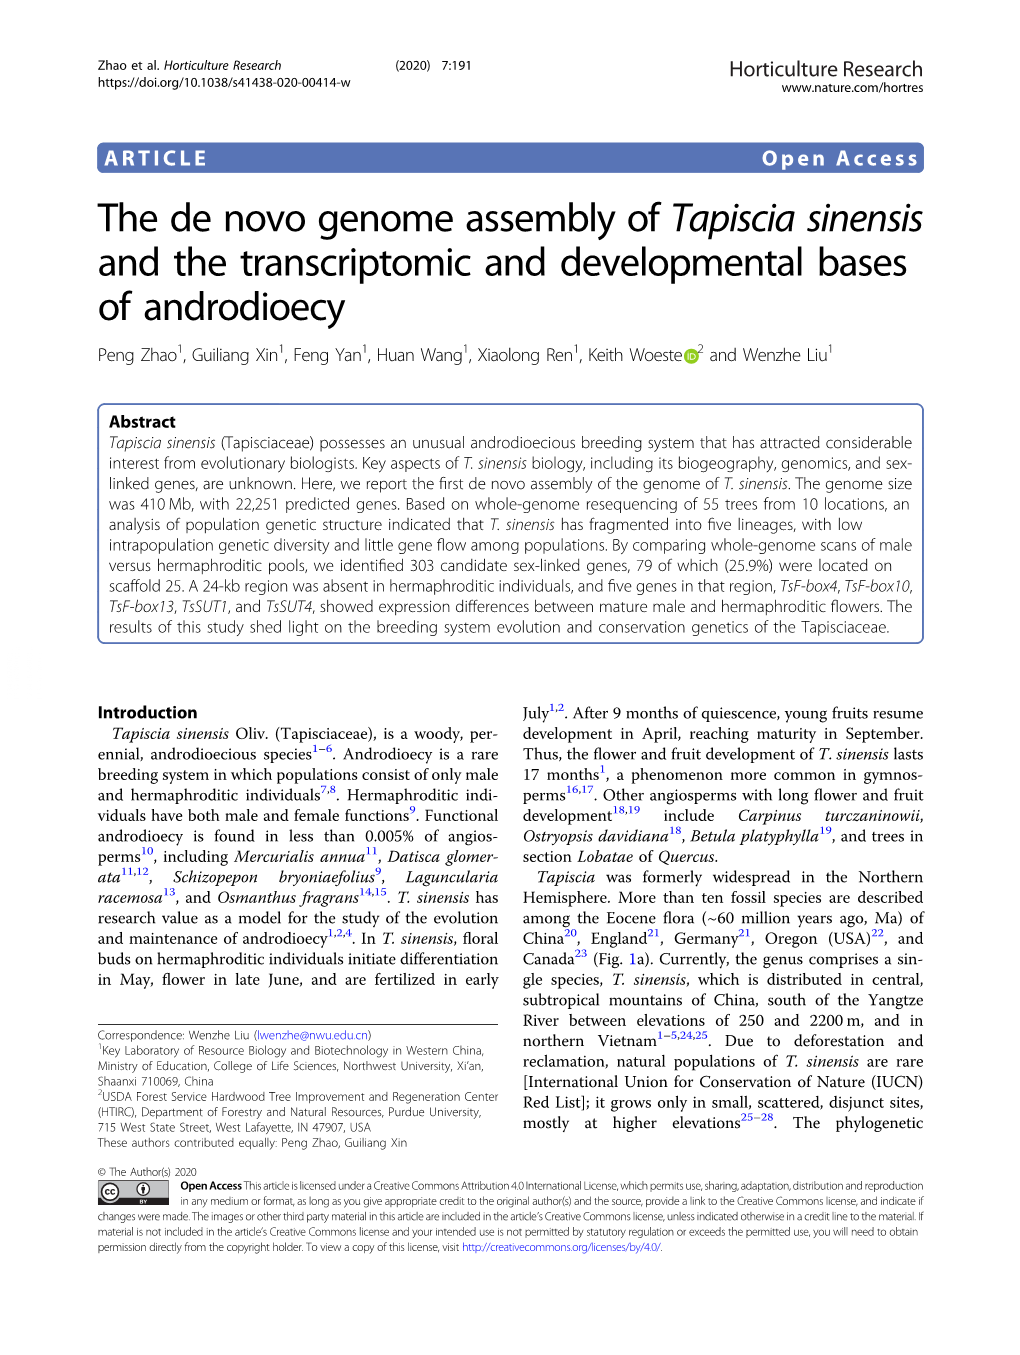 The De Novo Genome Assembly of Tapiscia Sinensis and the Transcriptomic and Developmental Bases of Androdioecy